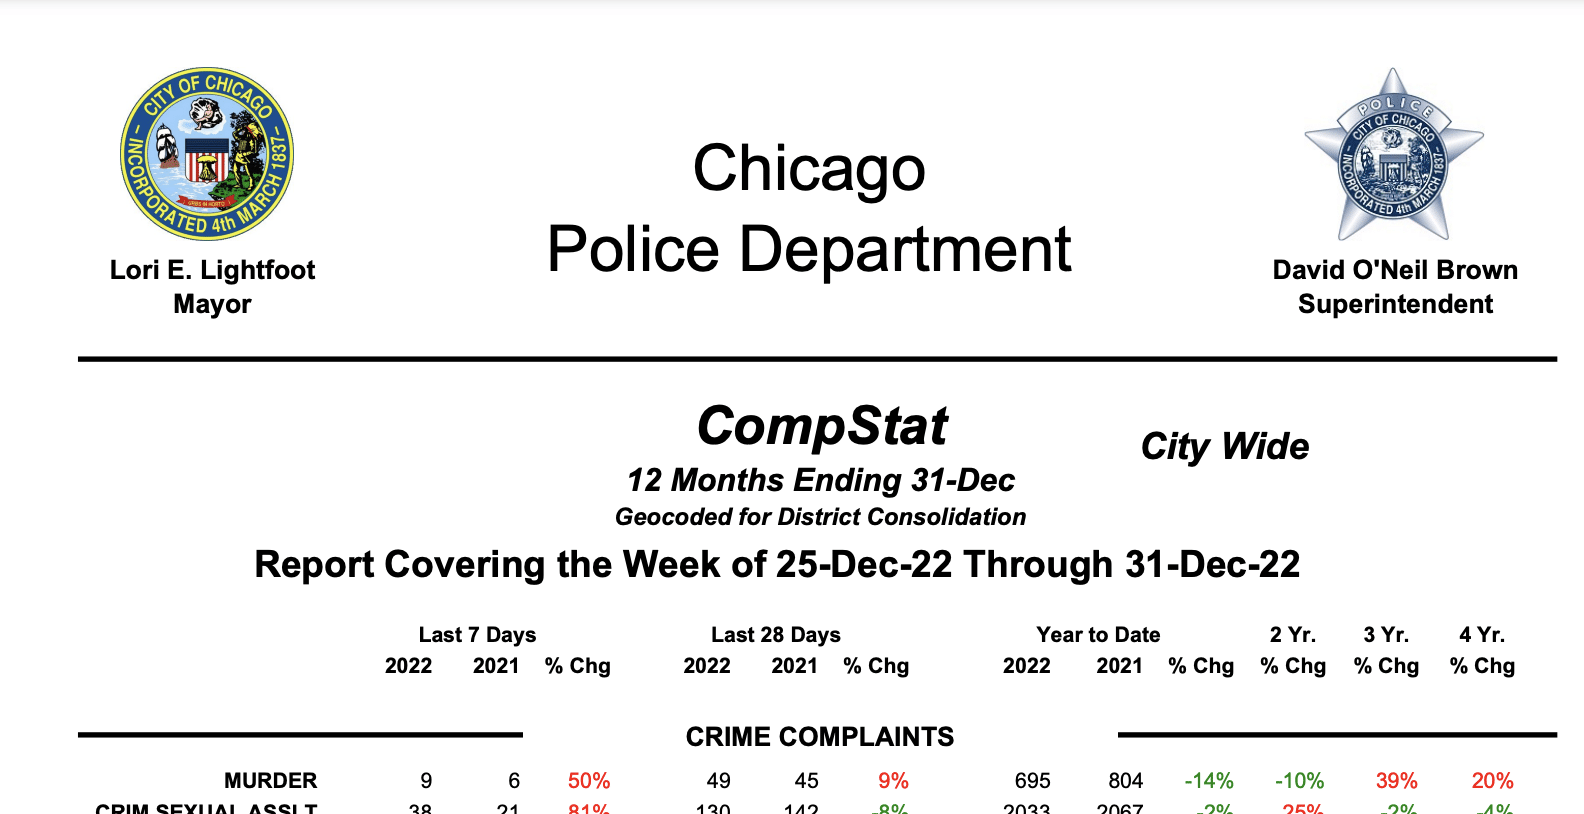 CompStat report from the Chicago Police Department 2022